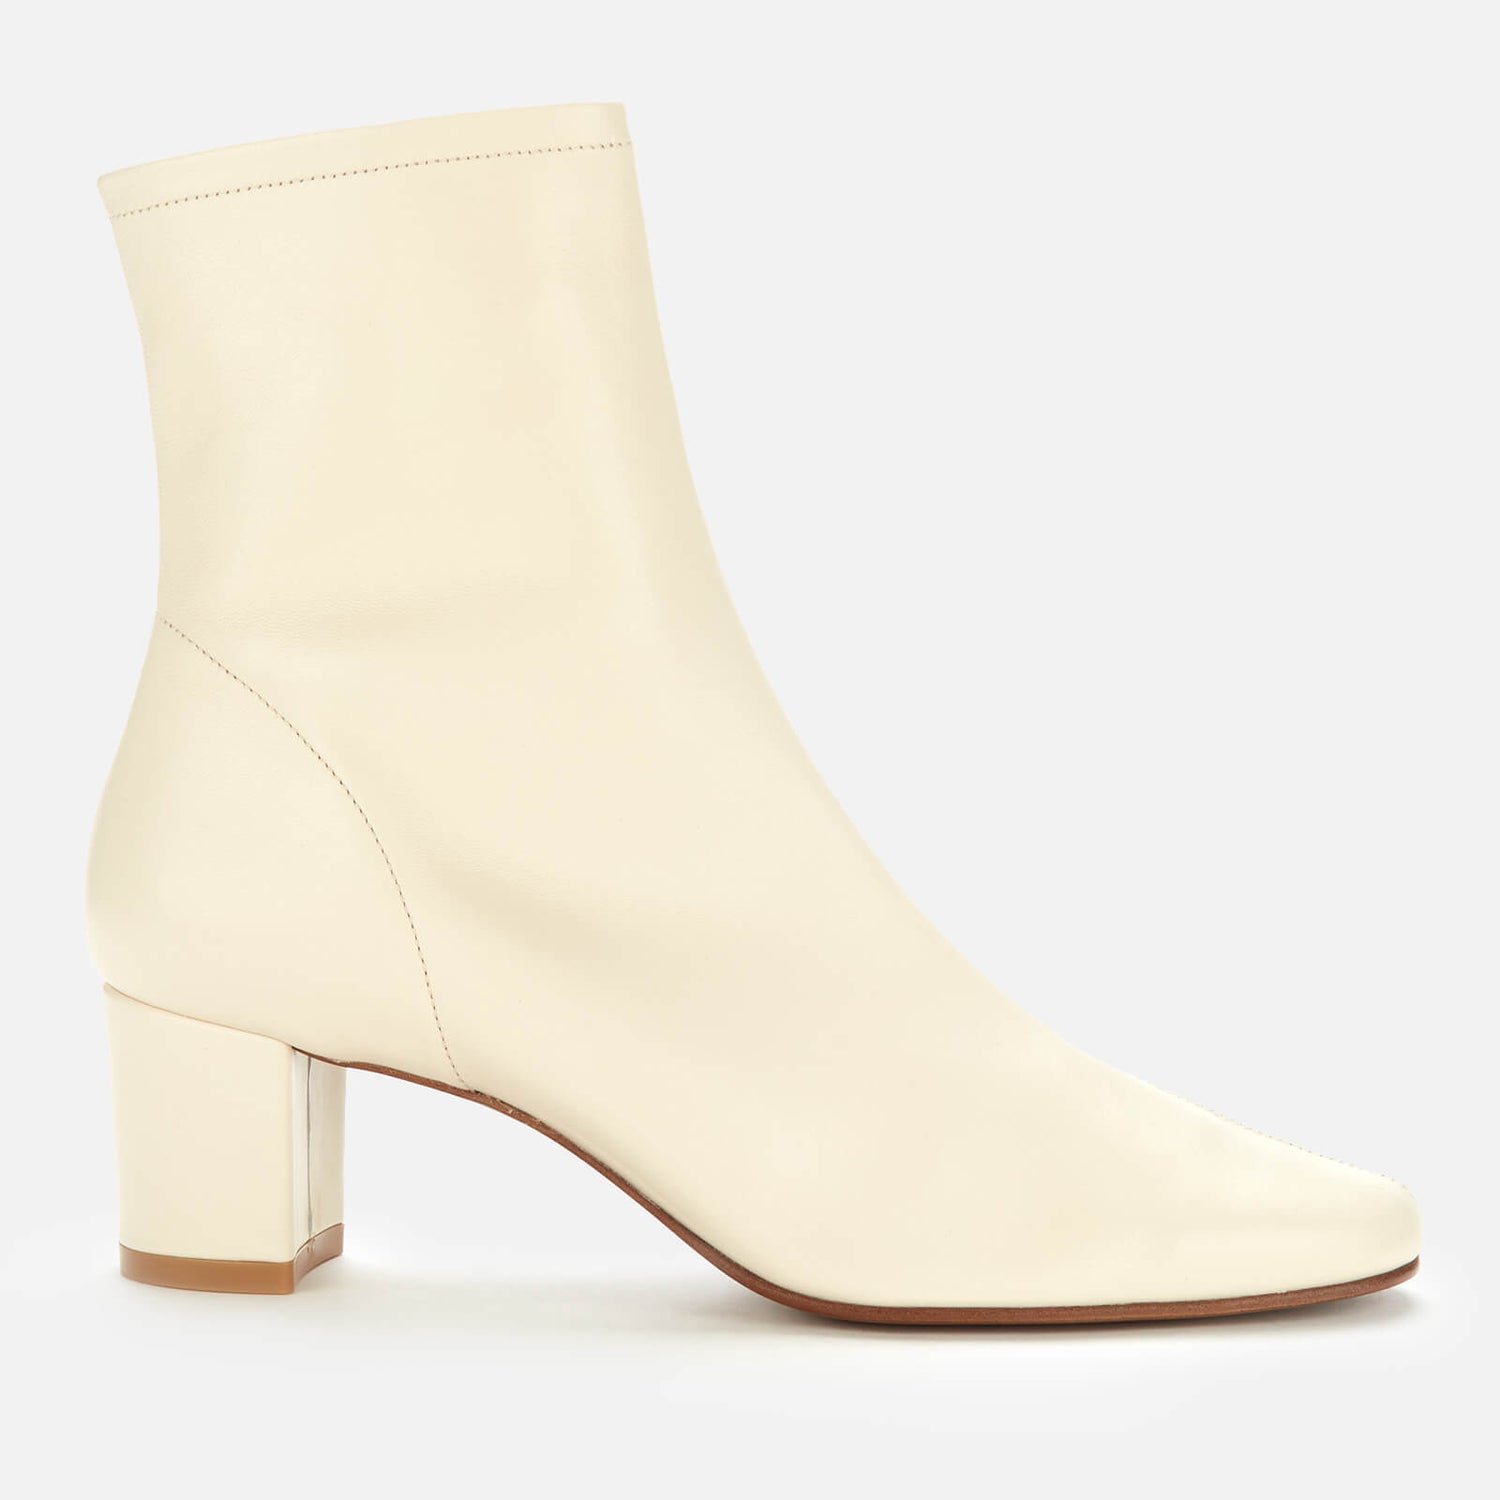 BY FAR Women's Sofia Leather Heeled Ankle Boots - White - UK 7